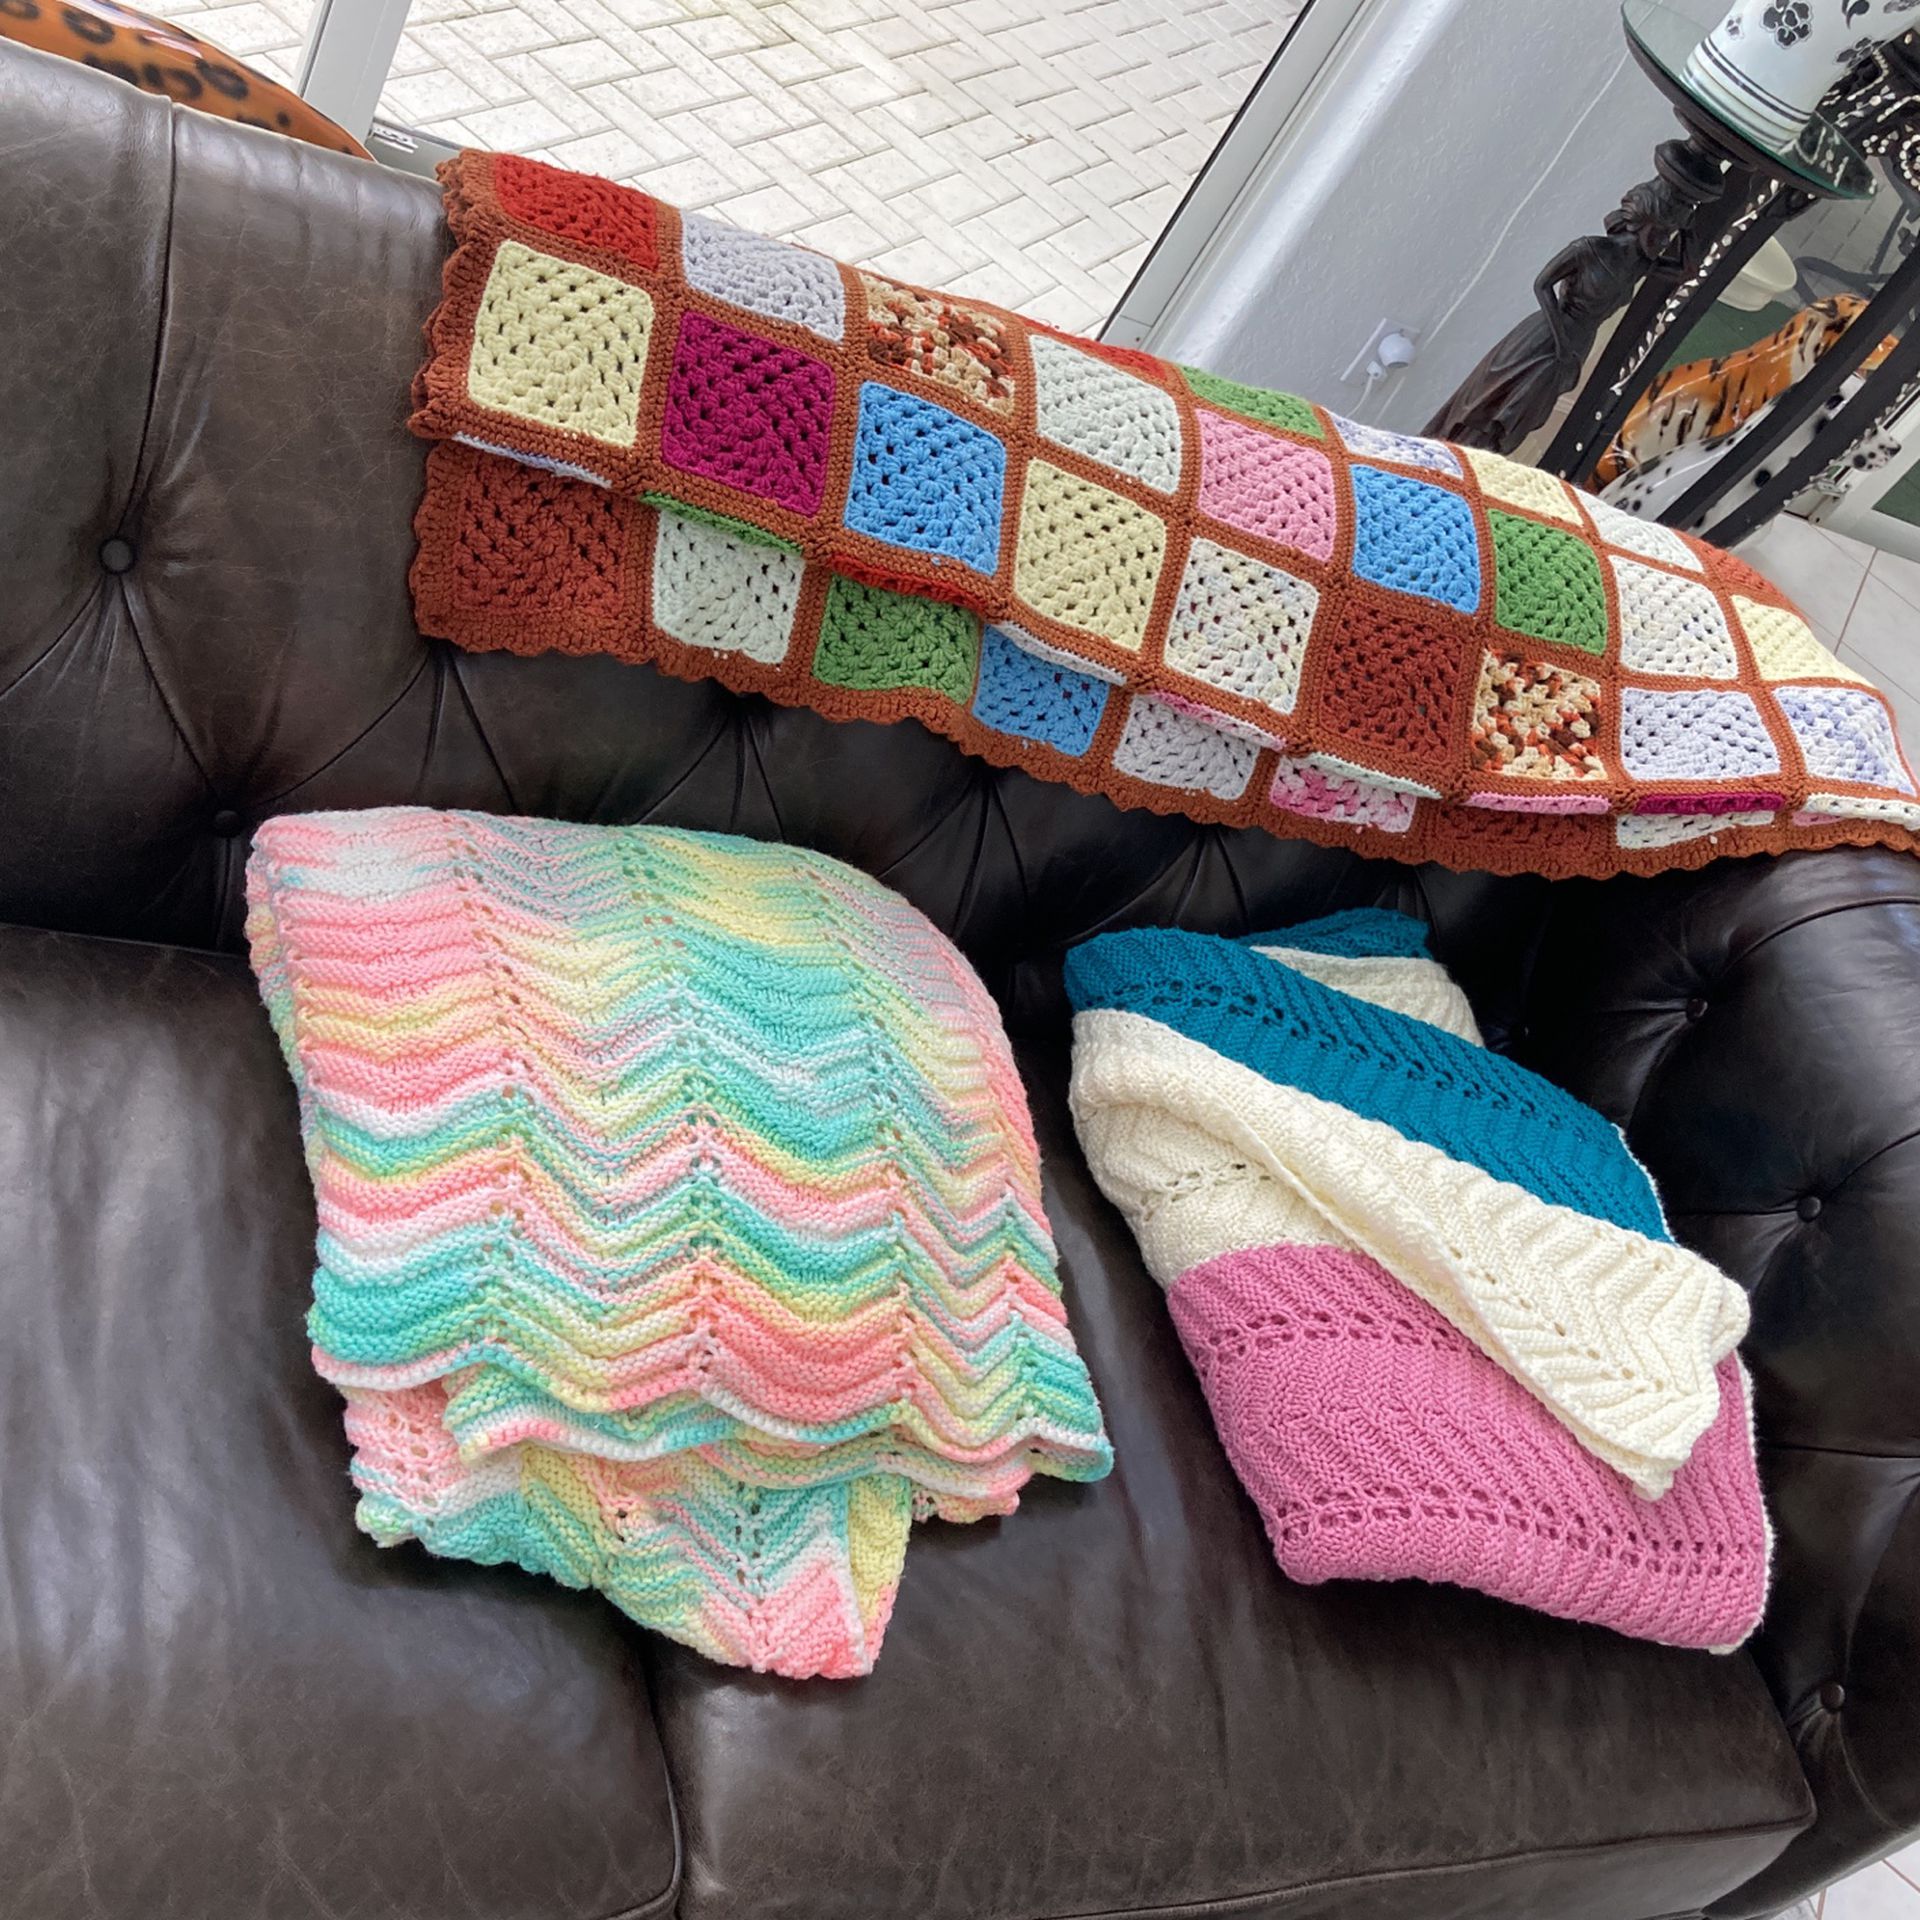 $25 Each Firm.  Hand Made Crocheted Knitted Afghan, Throw, Blanket, Quilt.  From Clean Home, No Smoke Or Pets. $25 Each Not Negotiable.  